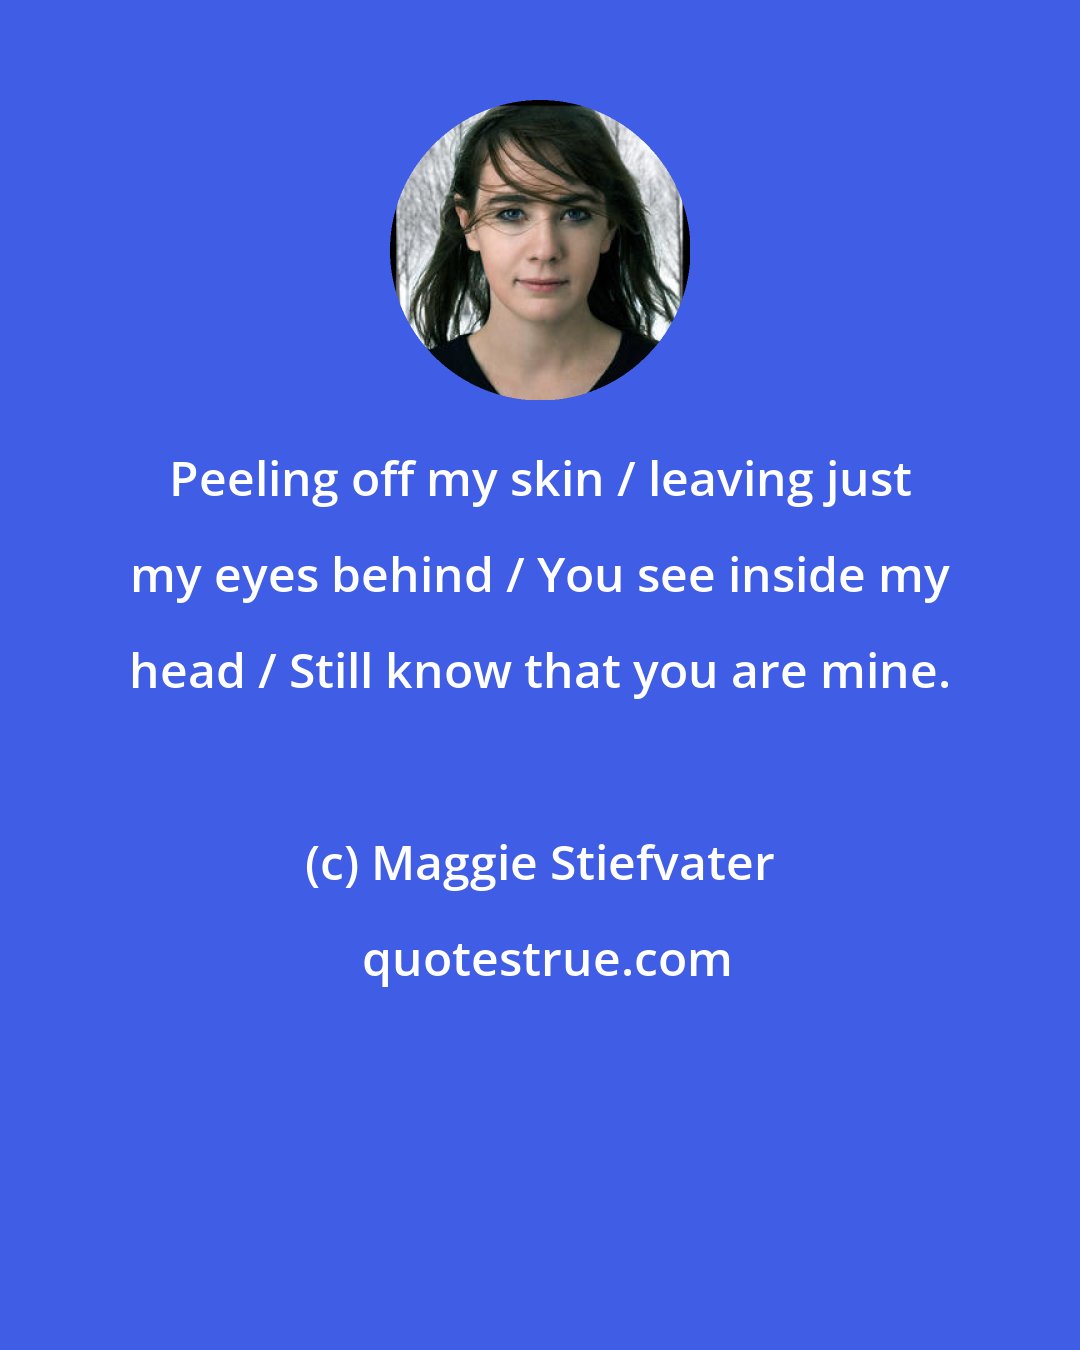 Maggie Stiefvater: Peeling off my skin / leaving just my eyes behind / You see inside my head / Still know that you are mine.